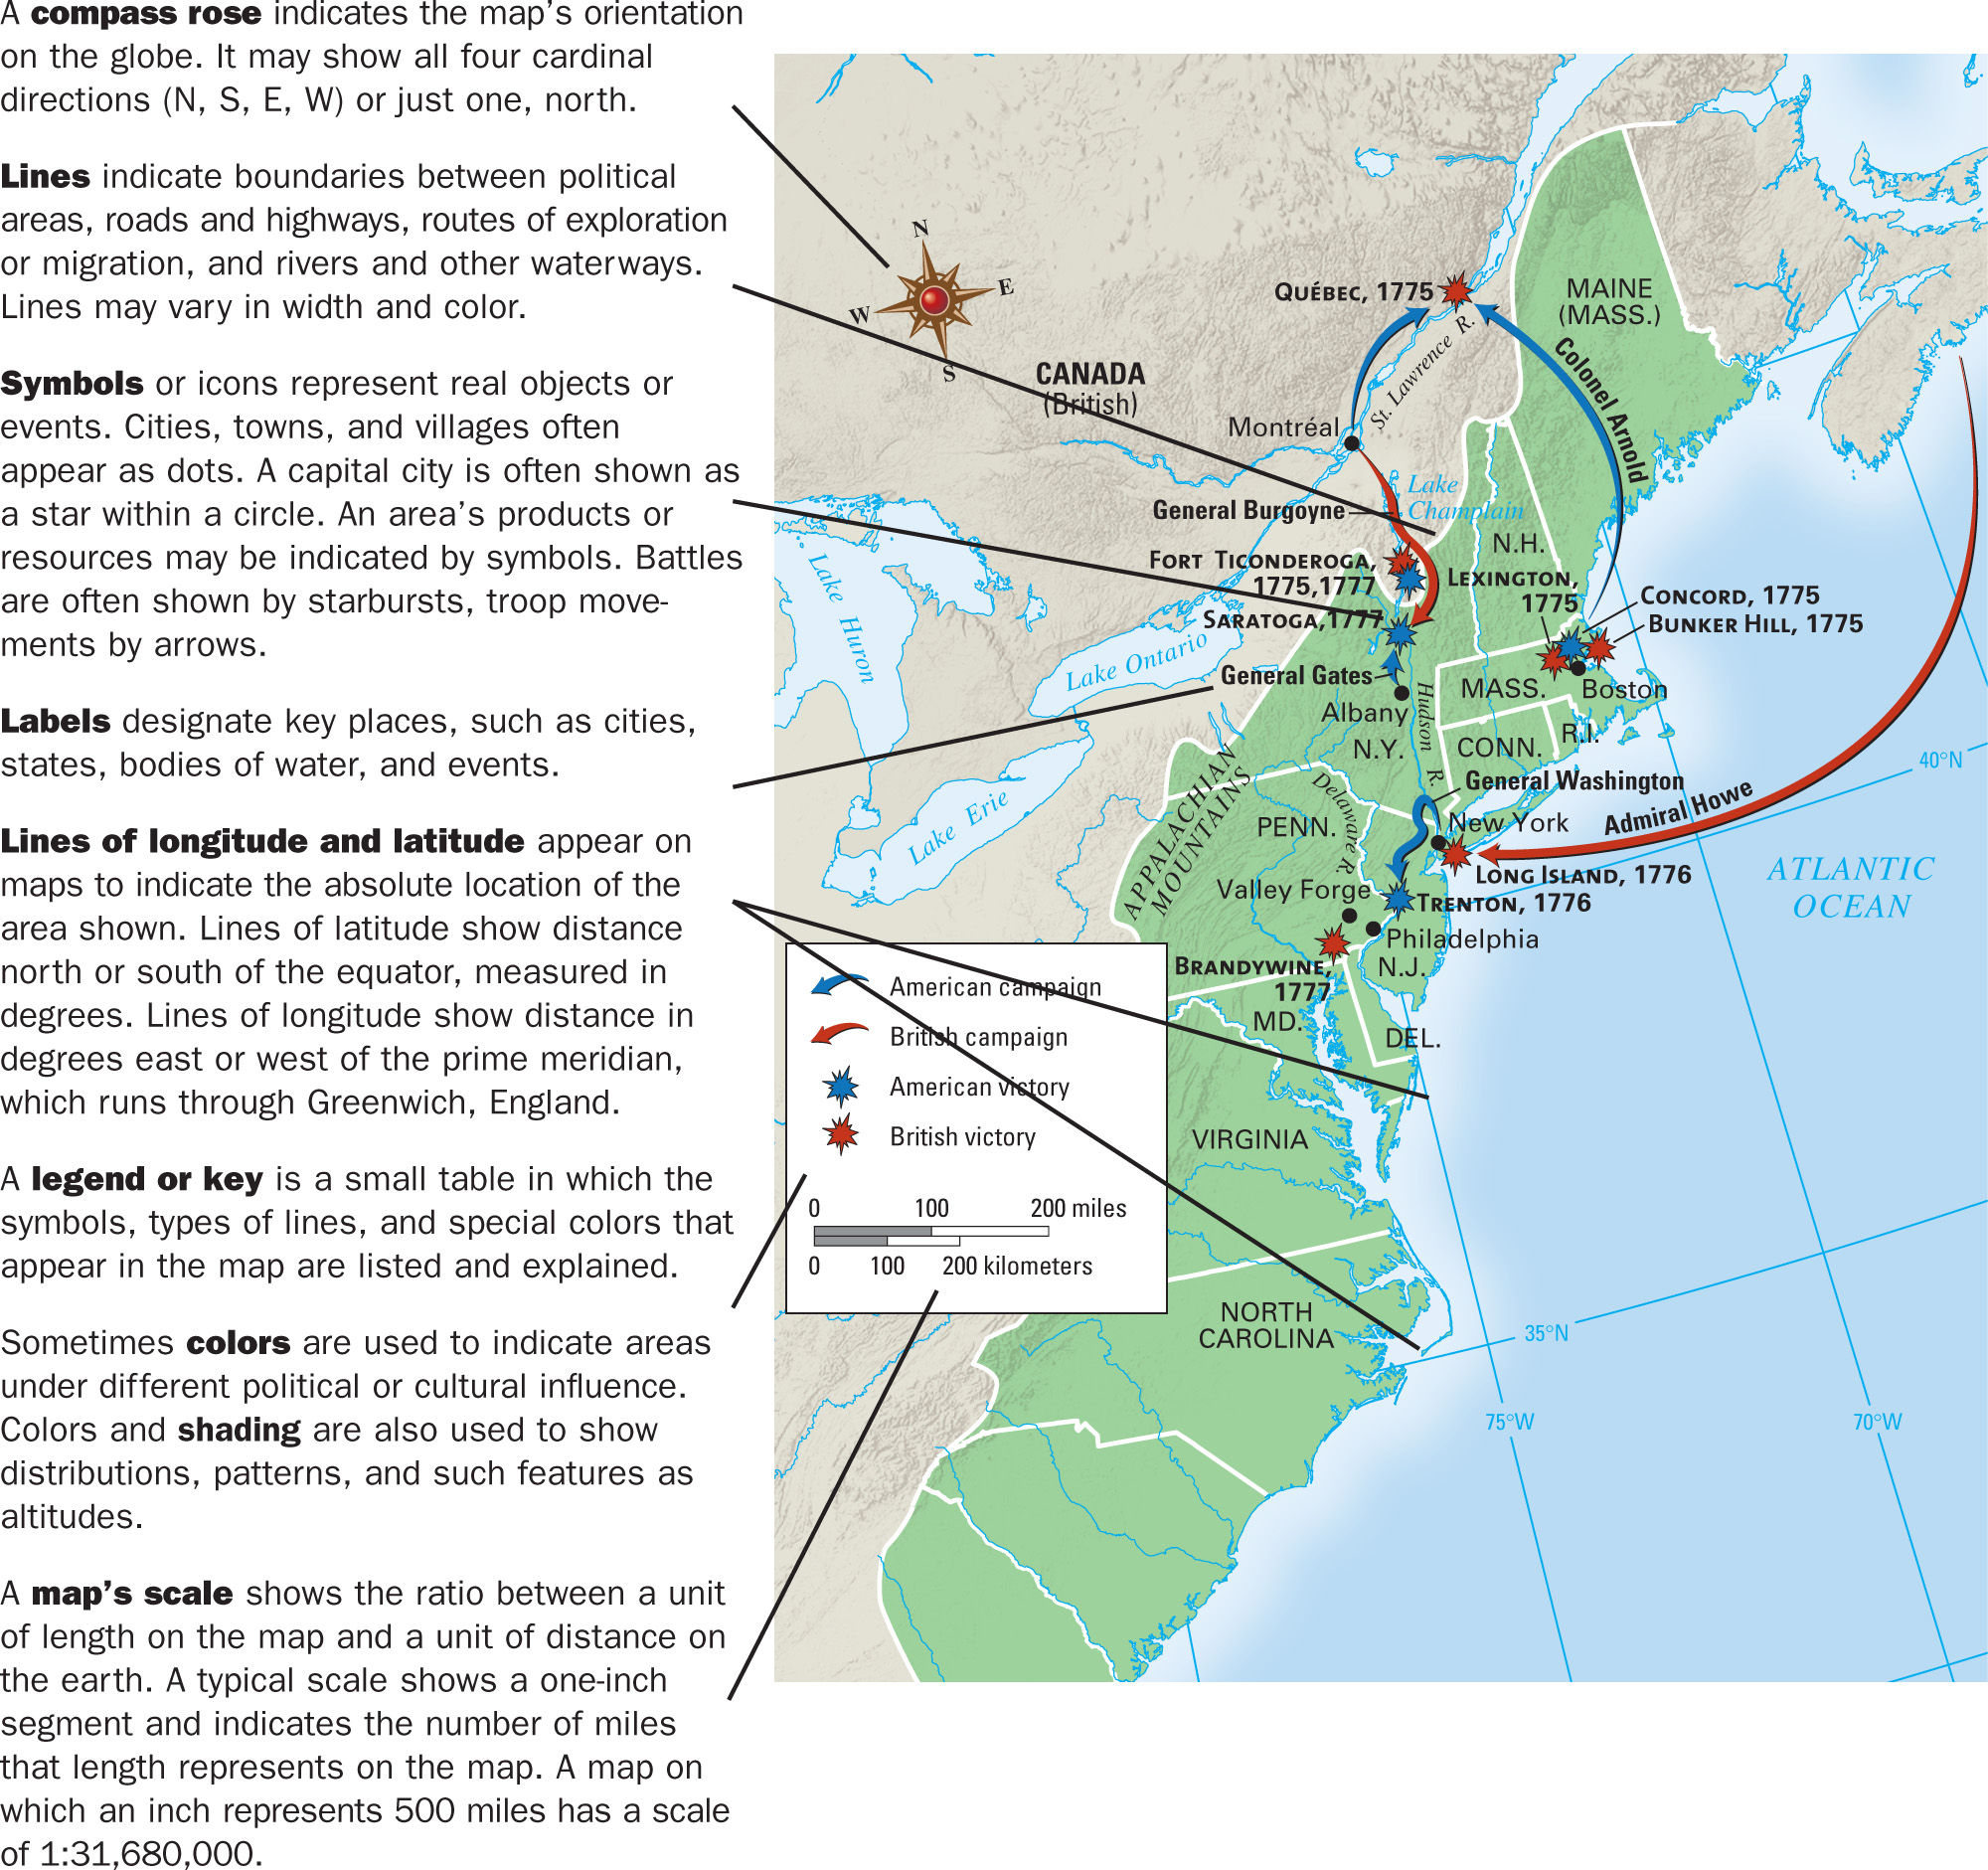 a map shows battles and campaigns of the Revolutionary War.